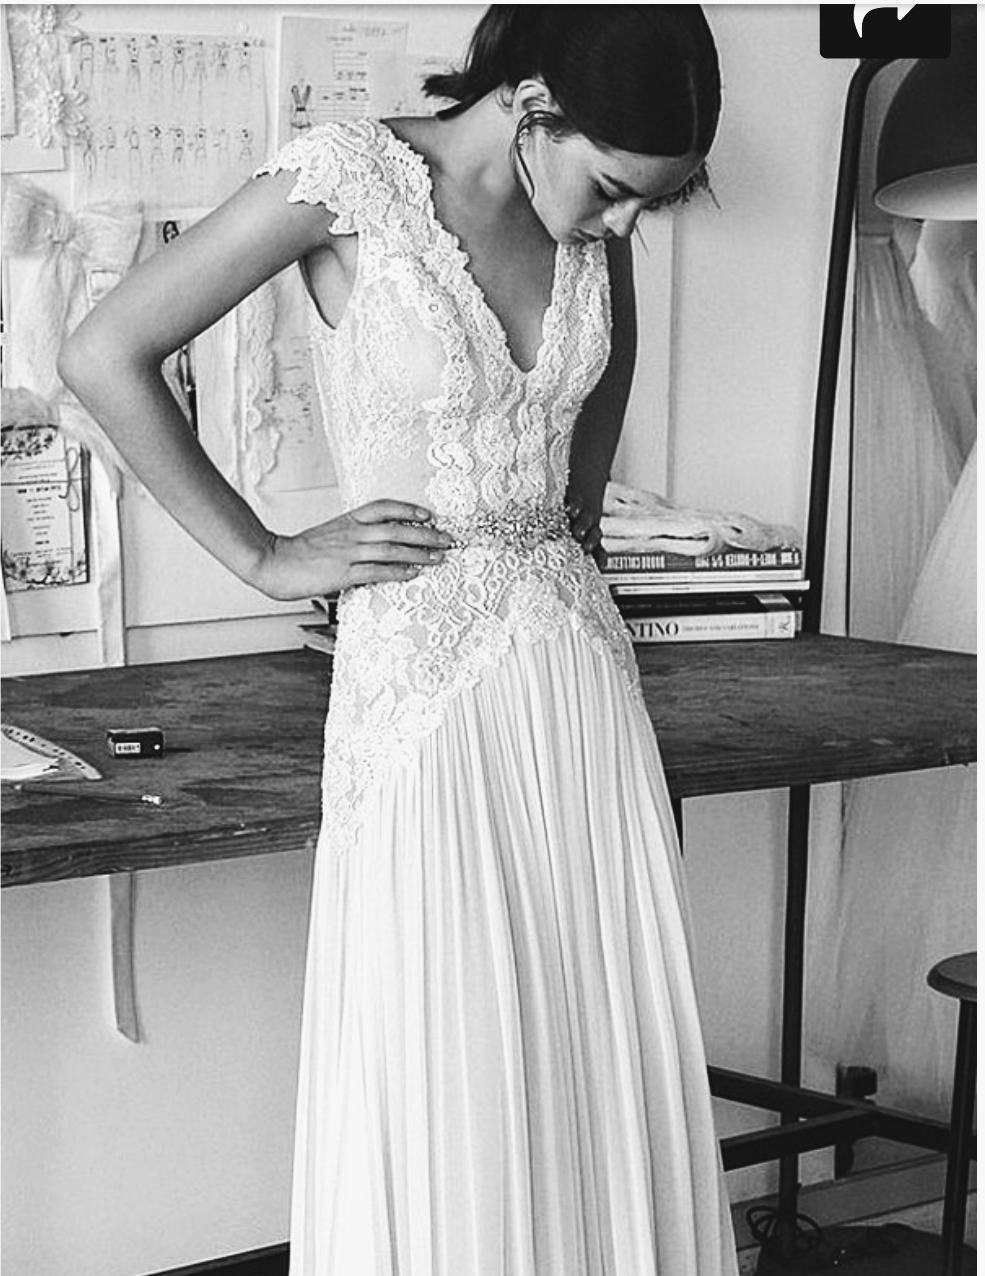 Bernice Fashions -Bridal, special occasion, alterations | clothing store | 87 Fitzroy St, Geelong VIC 3220, Australia | 0352217706 OR +61 3 5221 7706